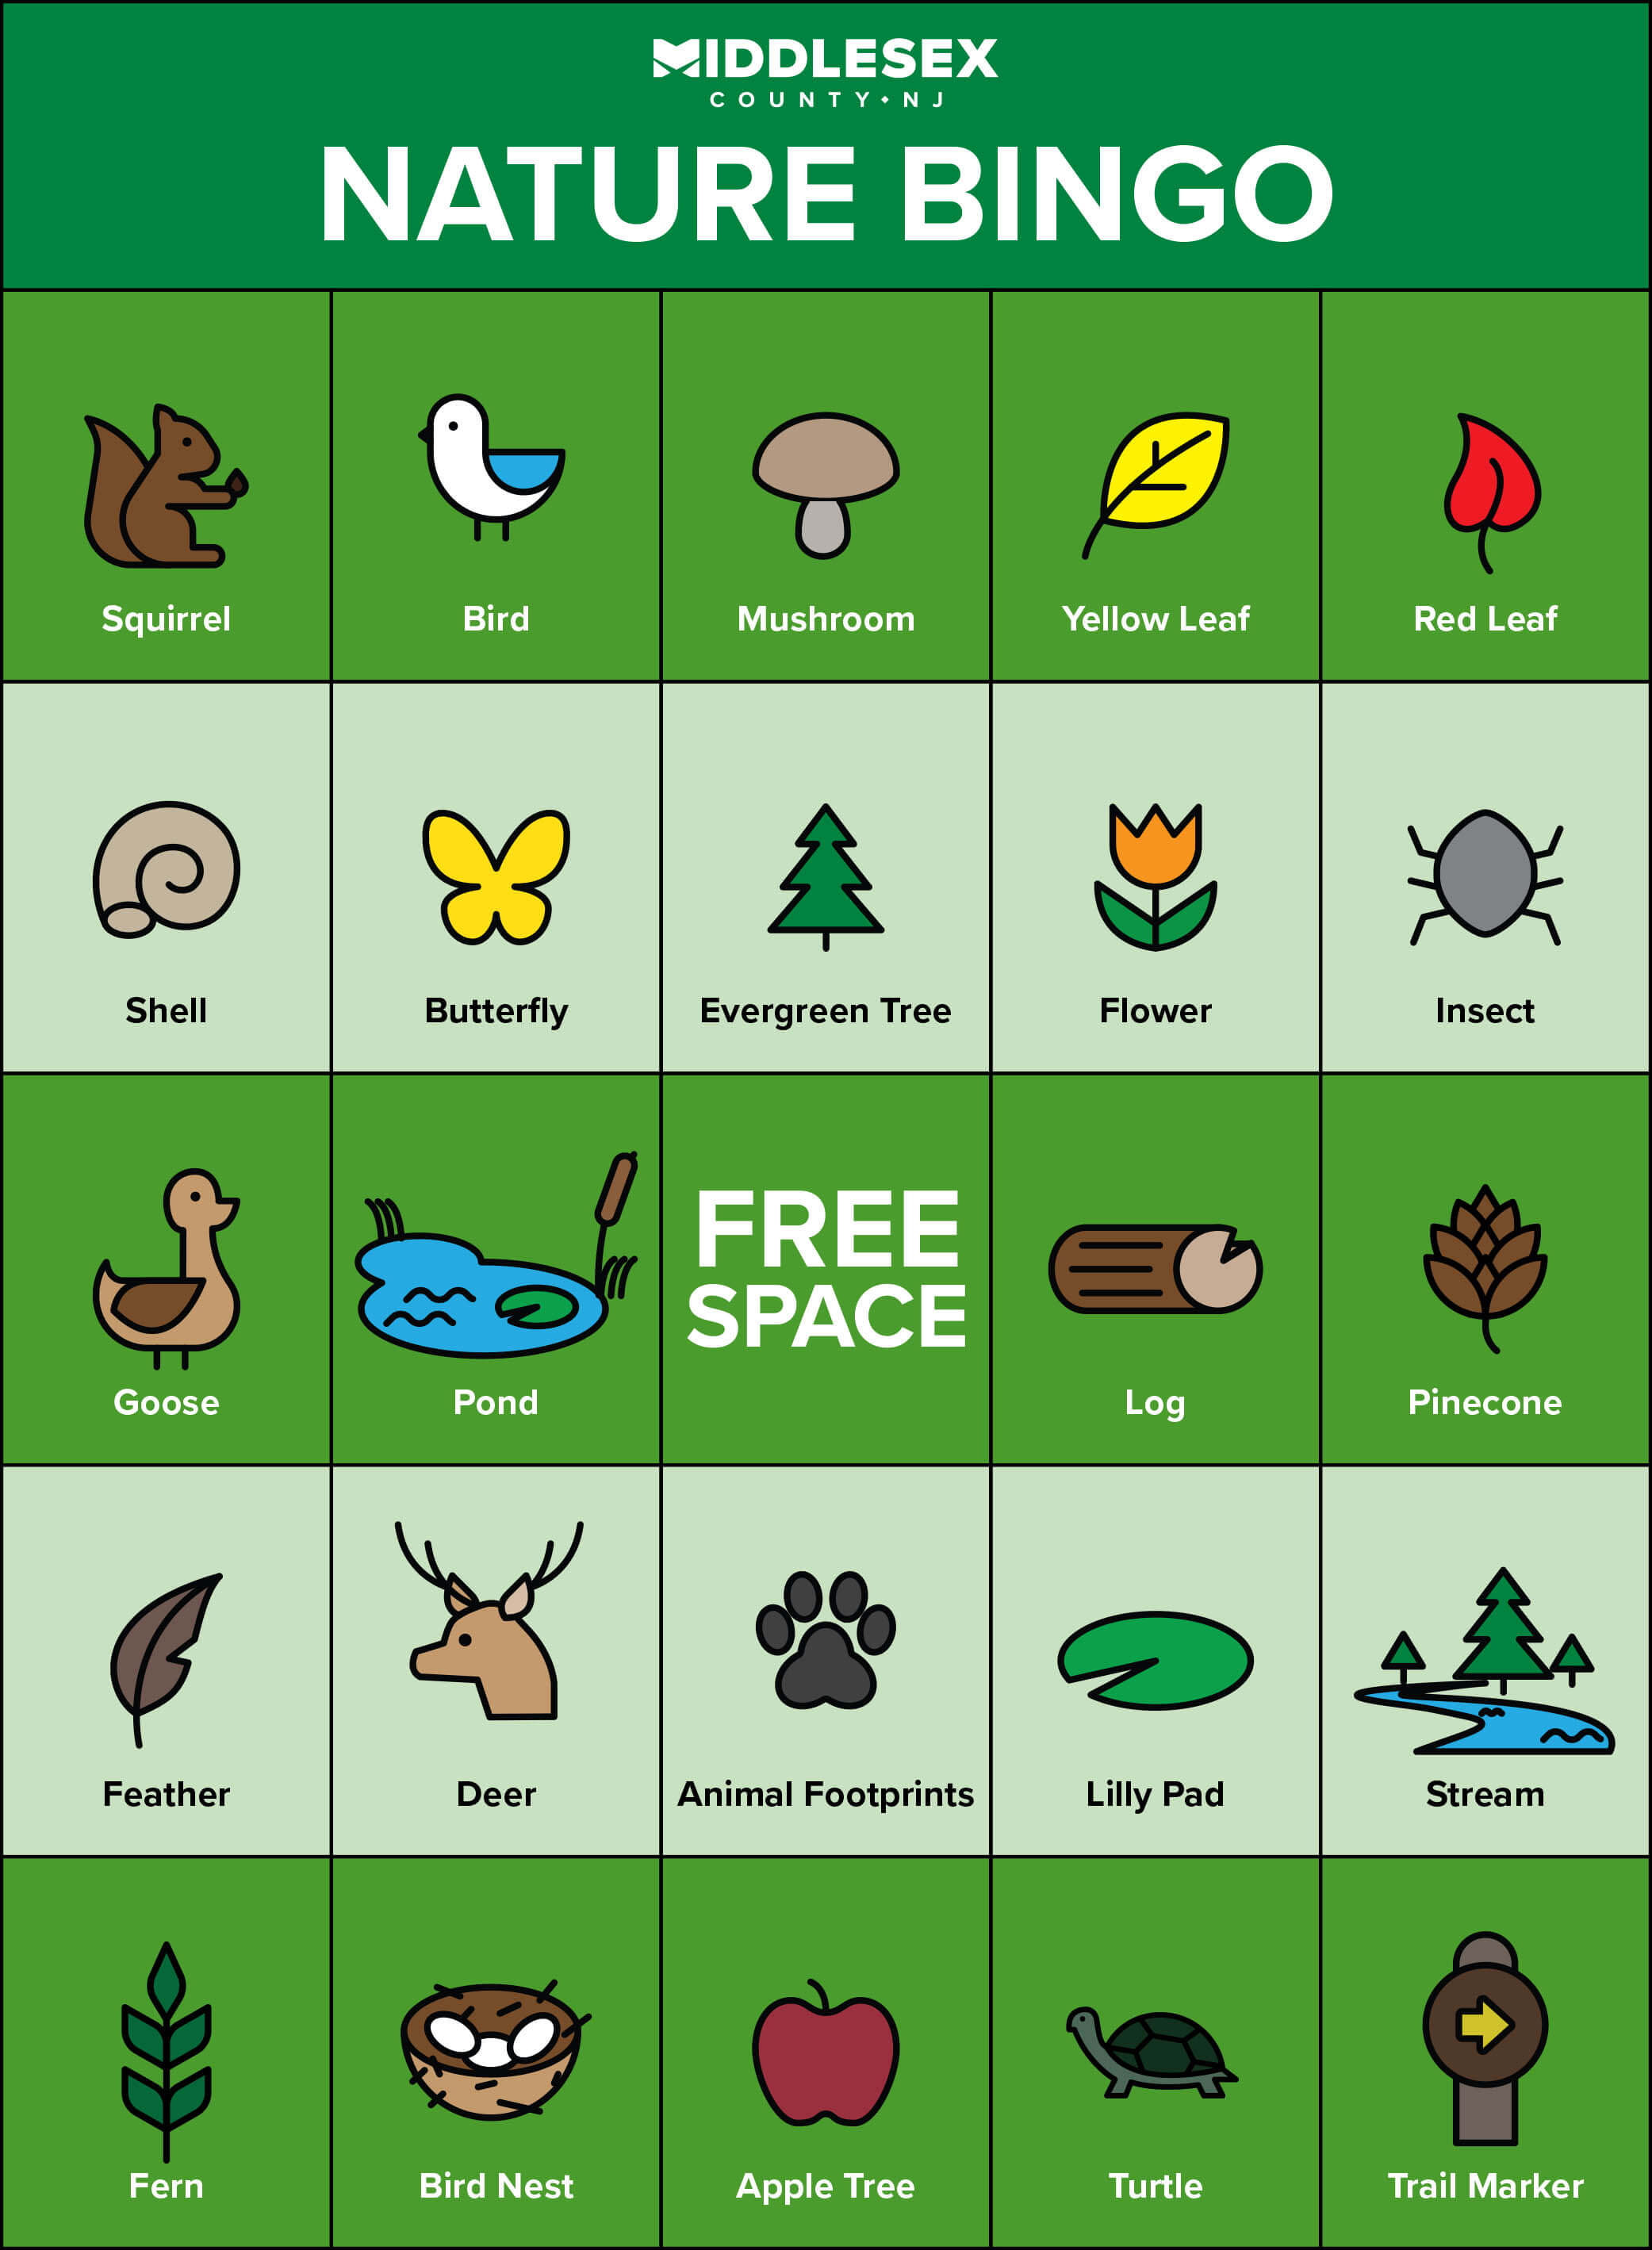 A Middlesex County Nature Bingo Board. 